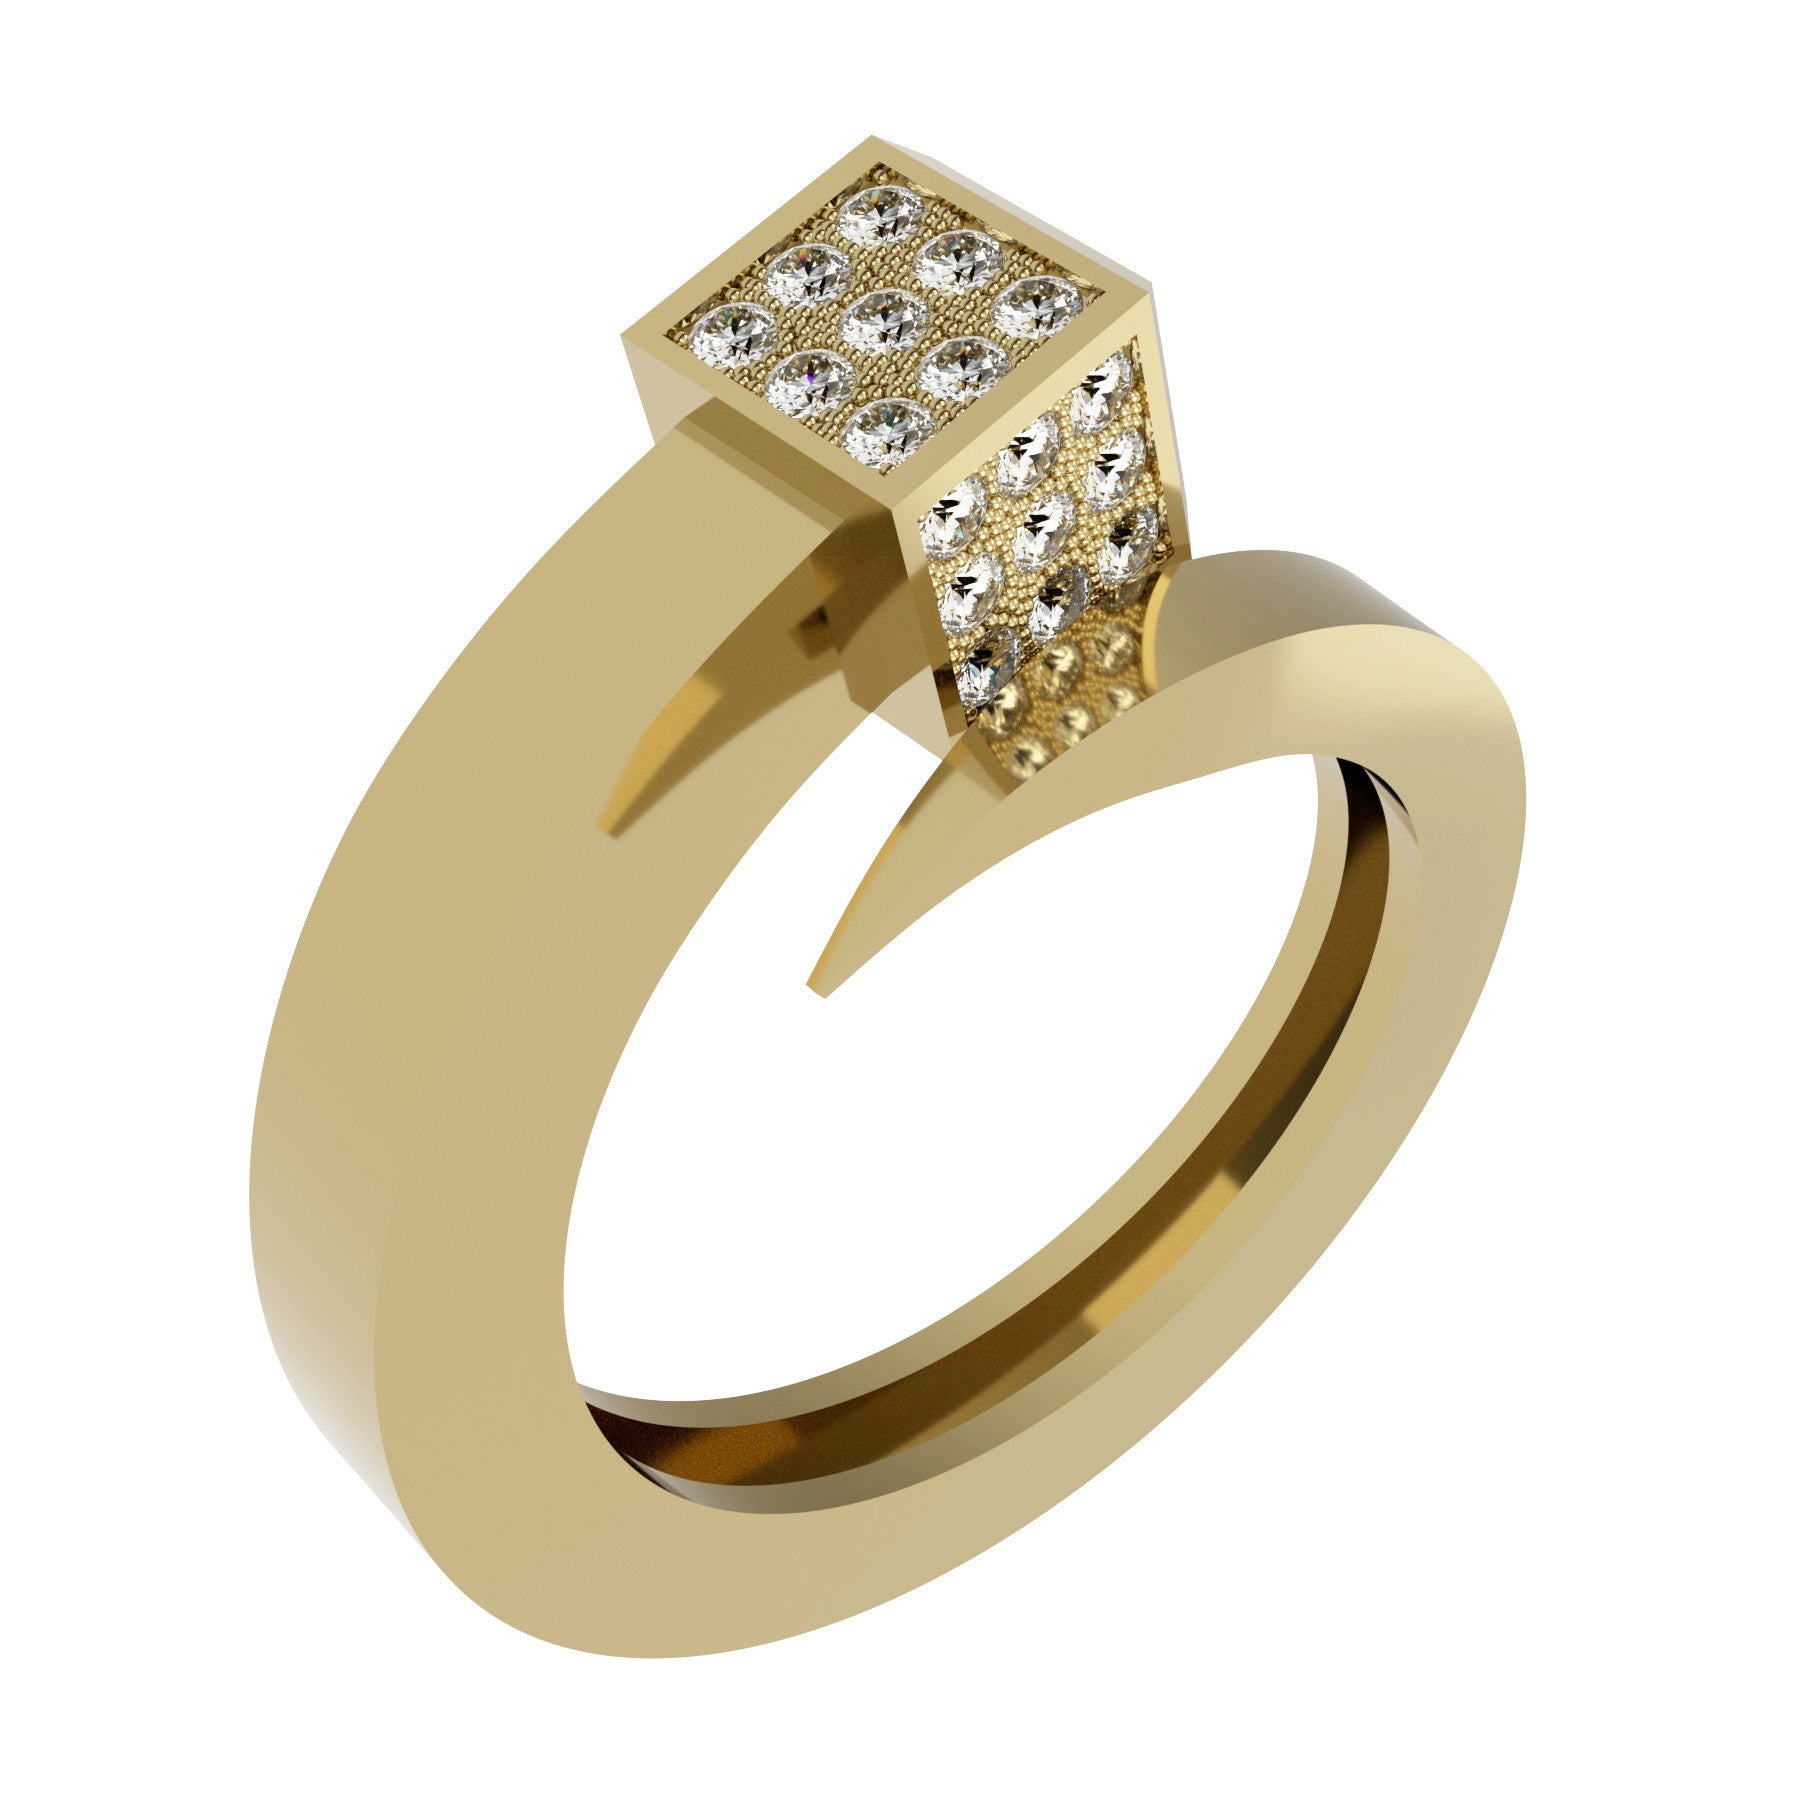 Lucky nail ring, 18 k yellow gold, weight about 8,00 g (0,28 oz), 31 round natural diamonds, width 8,70 mm